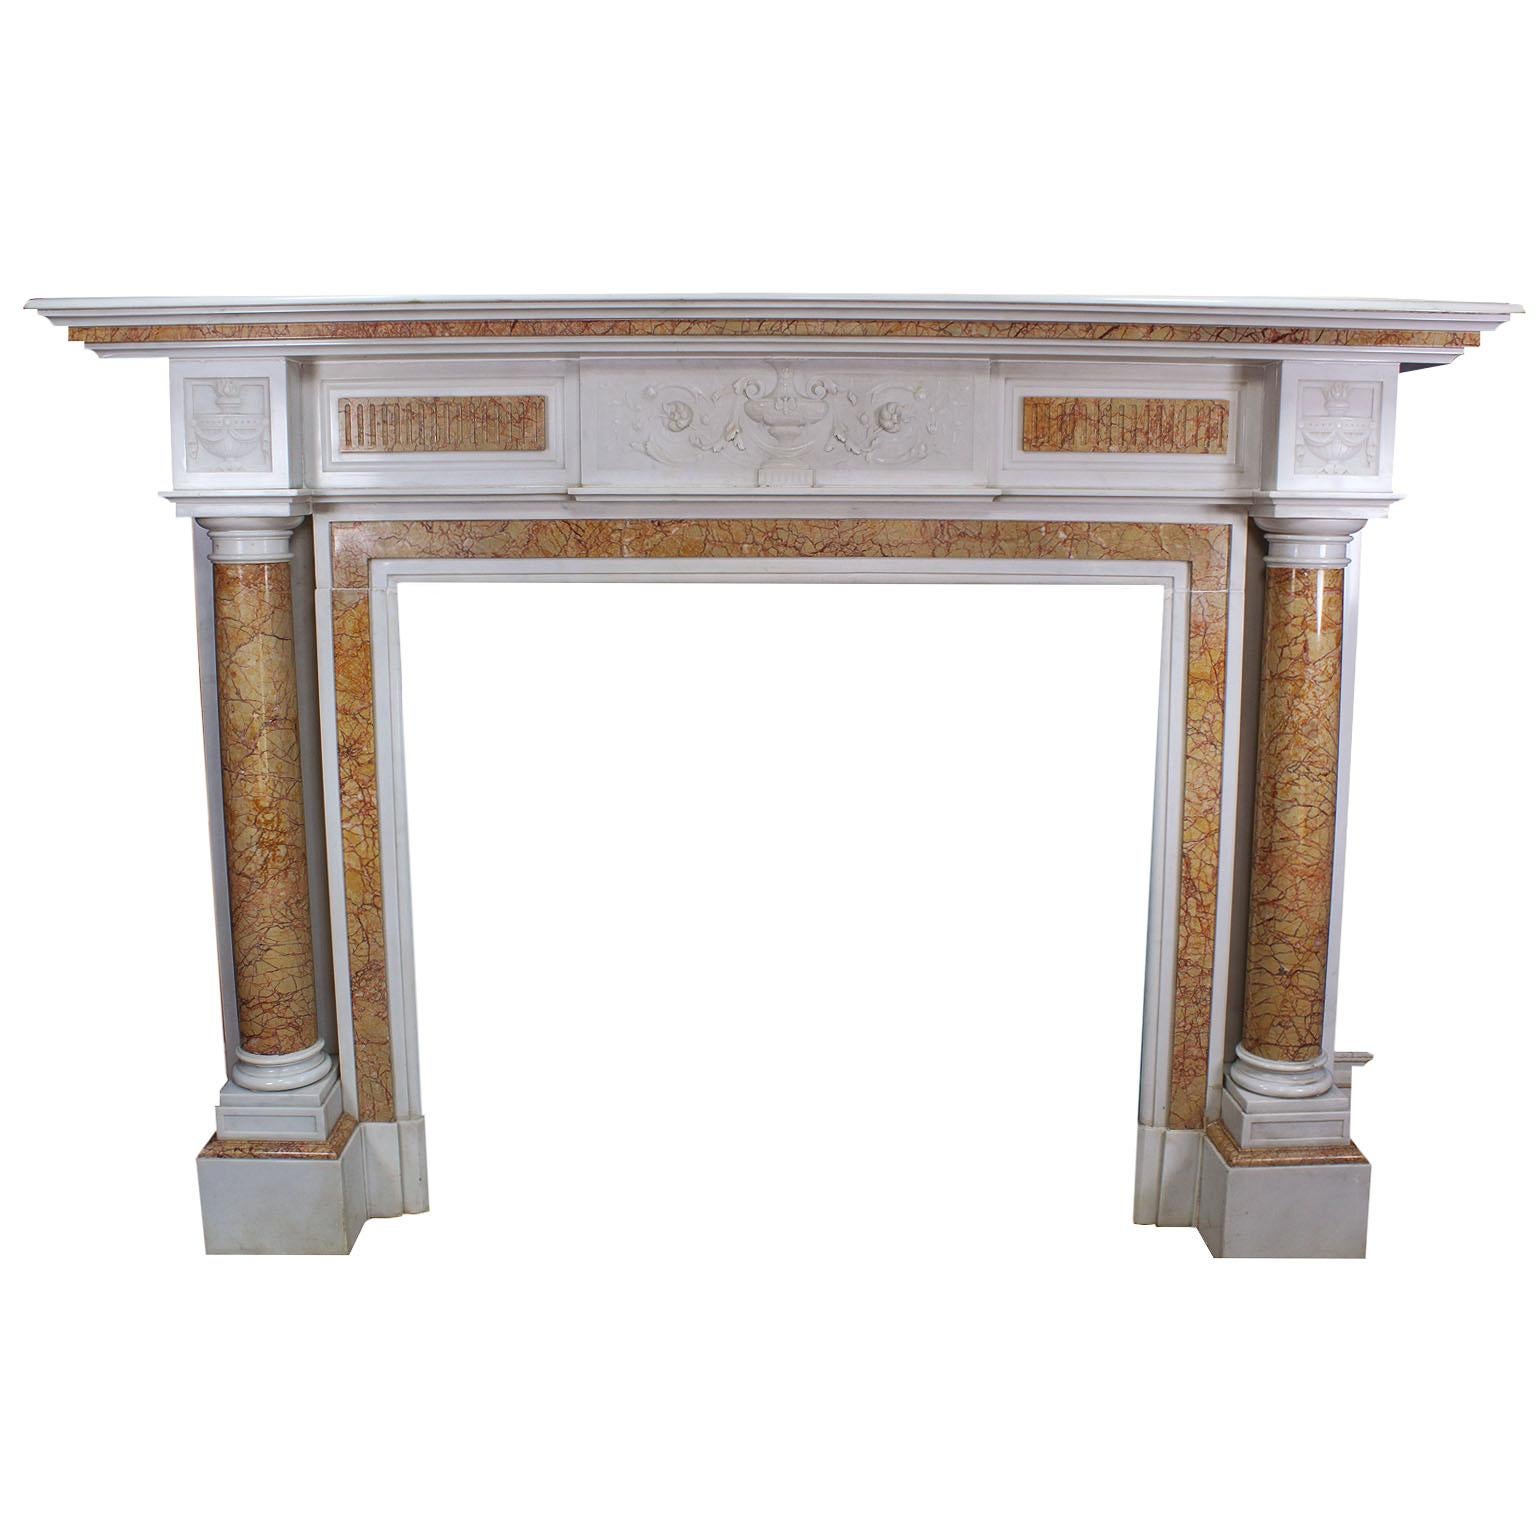 English Neoclassical and Georgian Style Carved Fireplace Mantel, Spelling Manor For Sale